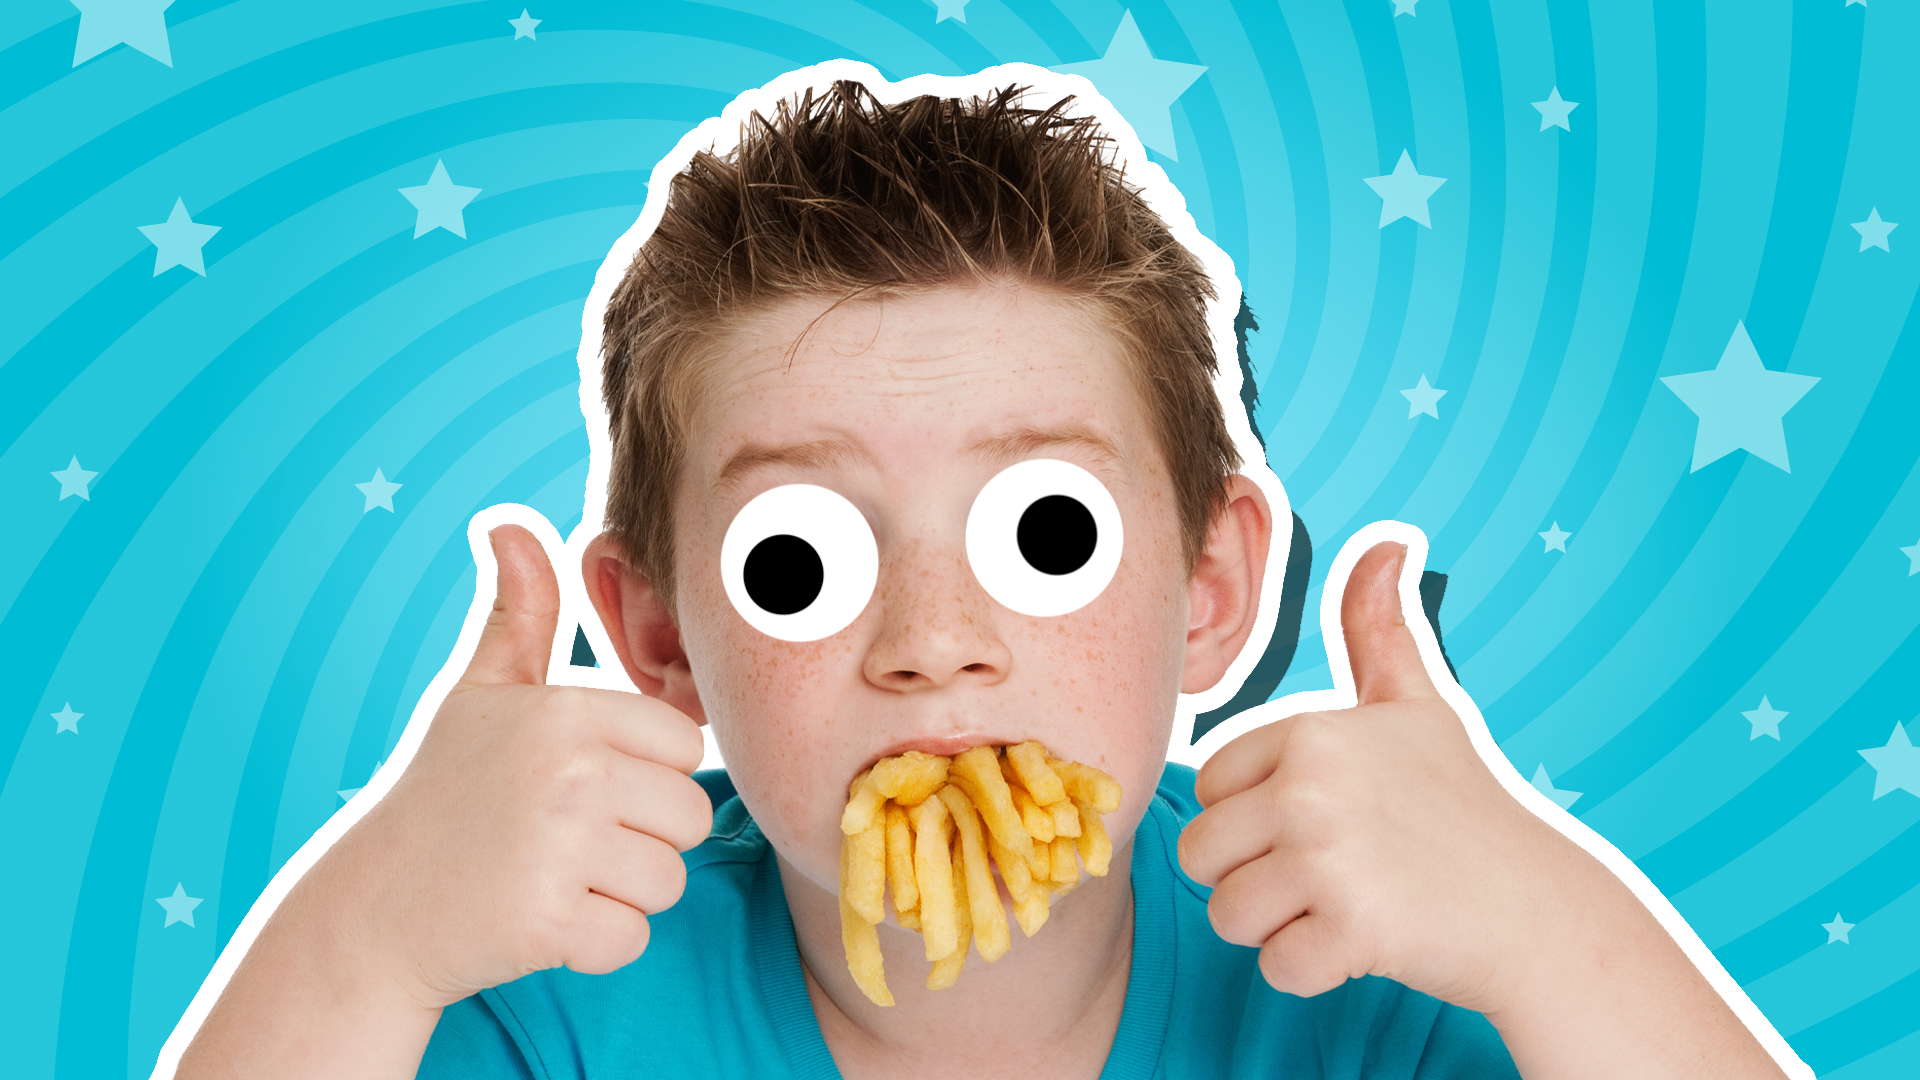 A child with a mouthful of chips, giving the thumbs up